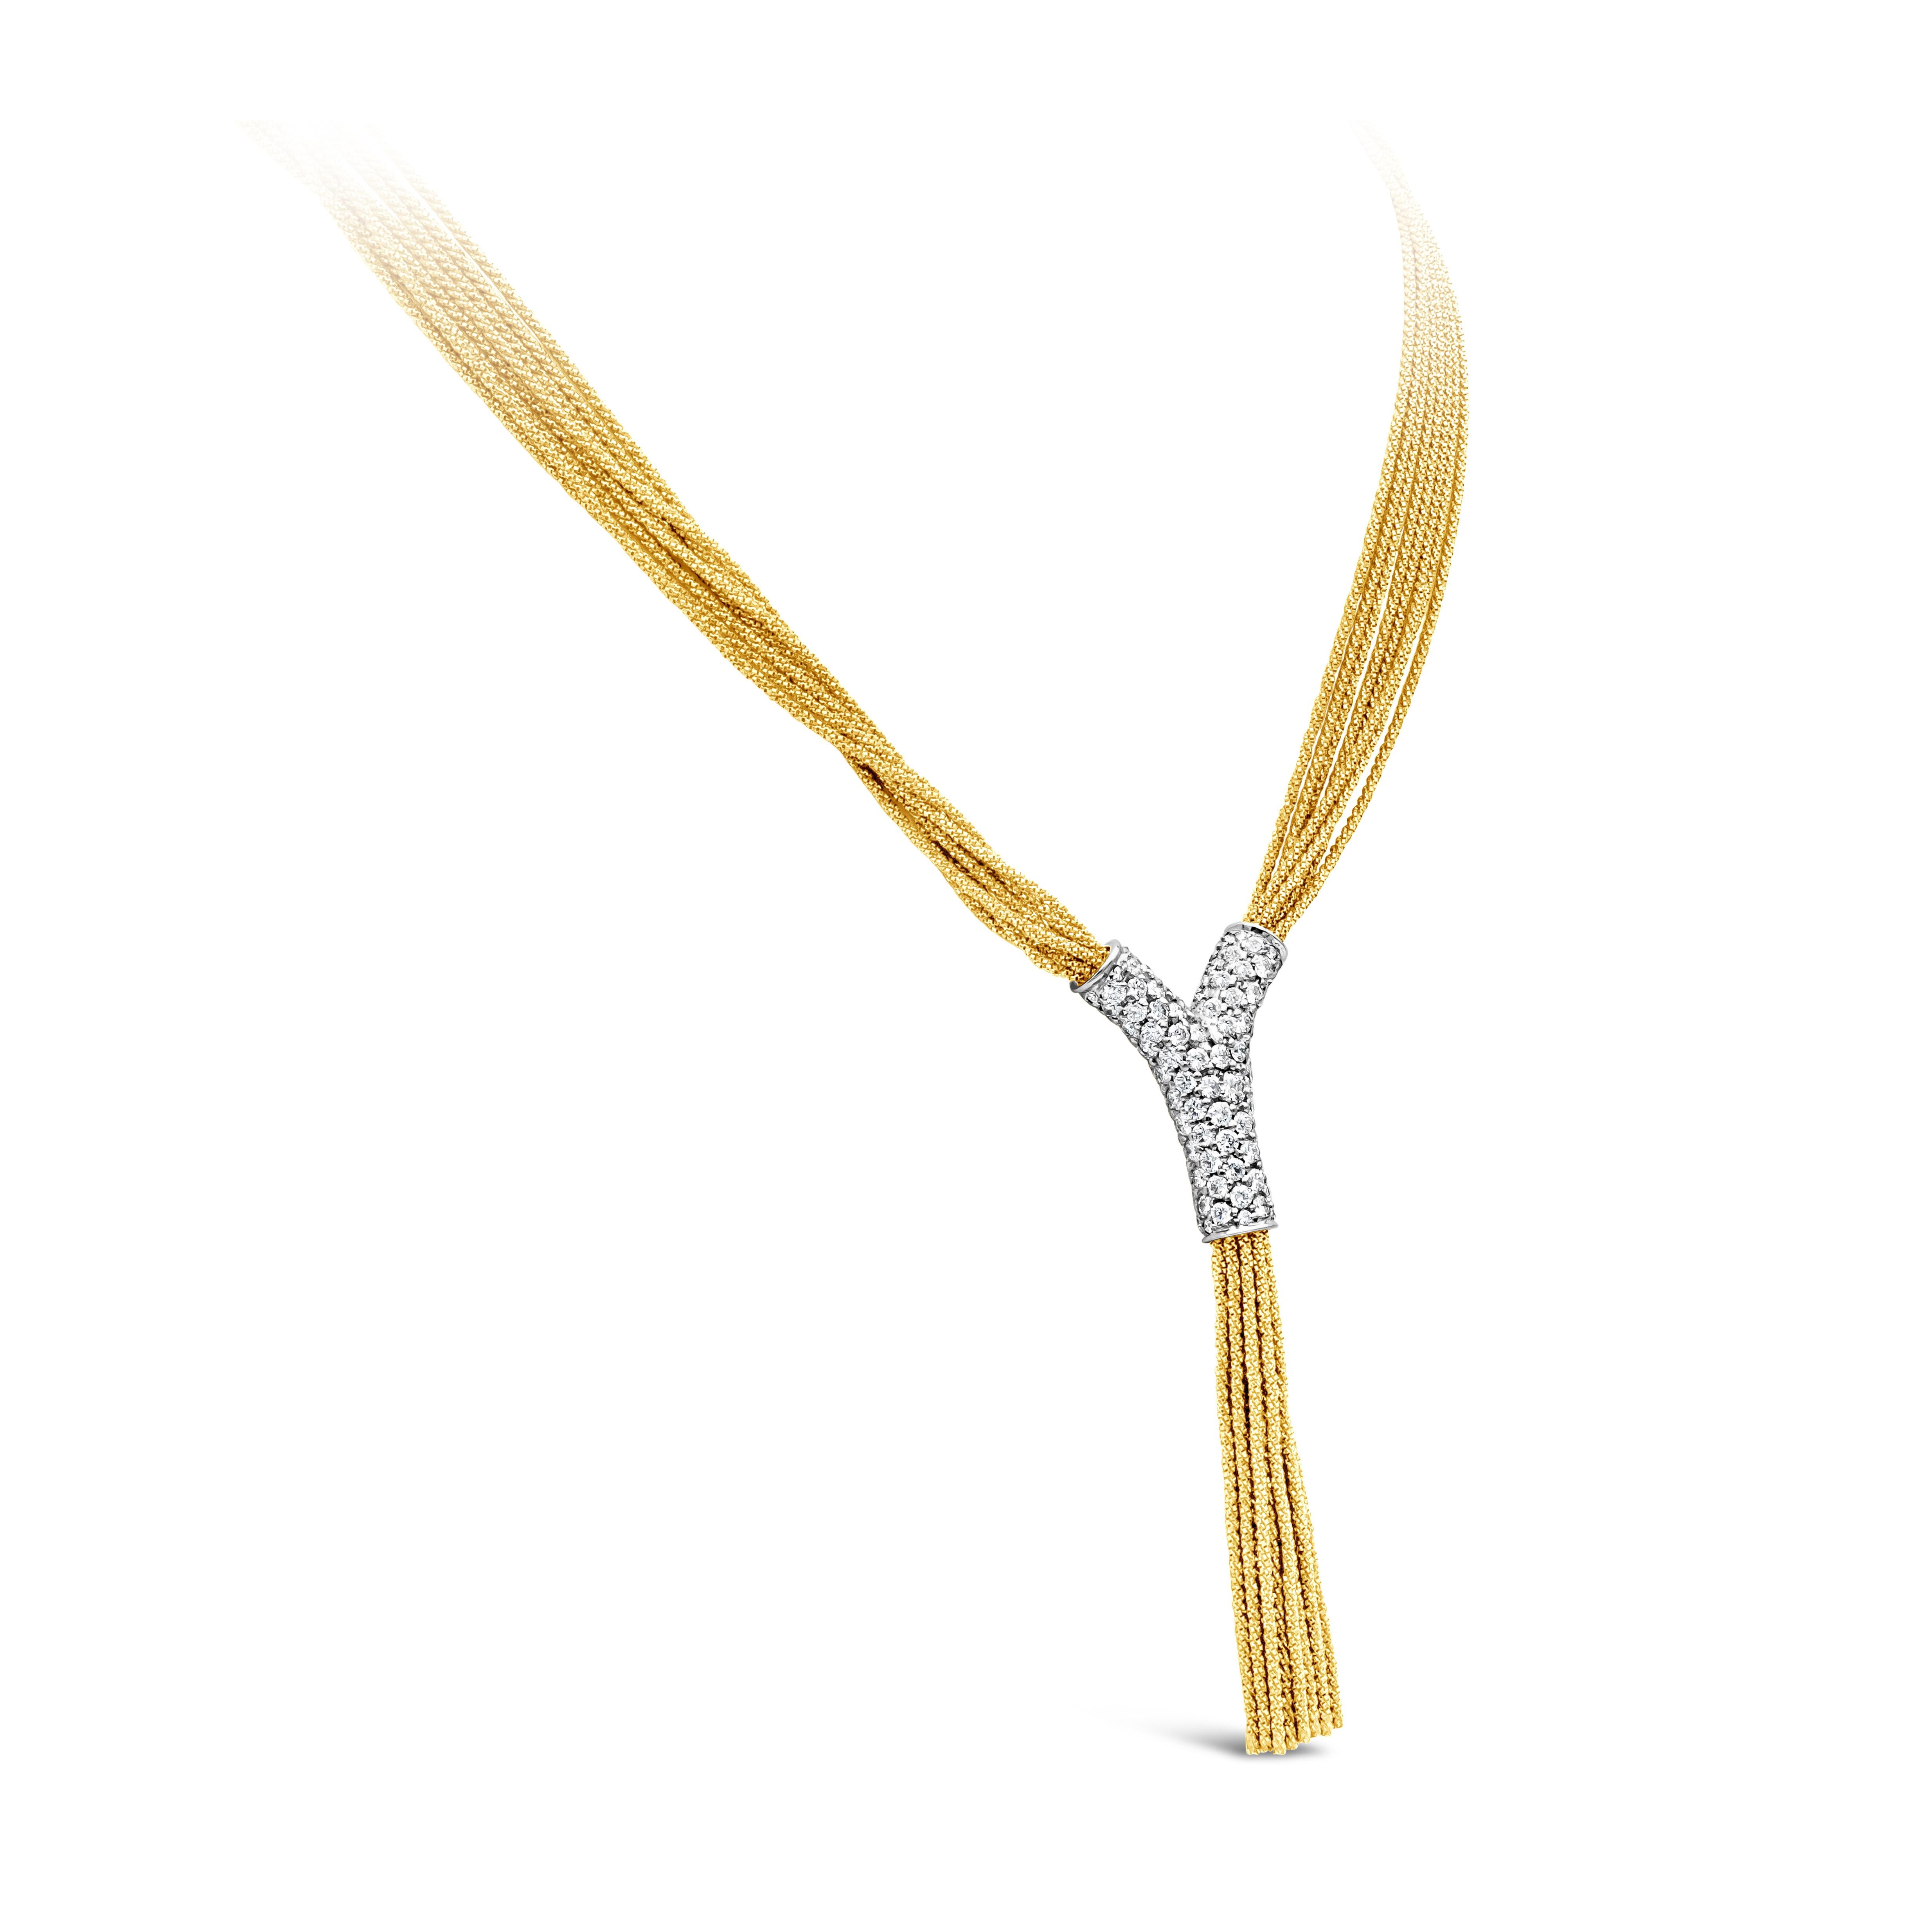 Yuri Ichihashi 18kt yellow gold woven ''Y'' necklace with 8 strands of woven gold and diamond ''Y'' enhancer to top it off. The necklace is set with 4.41 carats of F Color and VS in Clarity round cut diamonds.